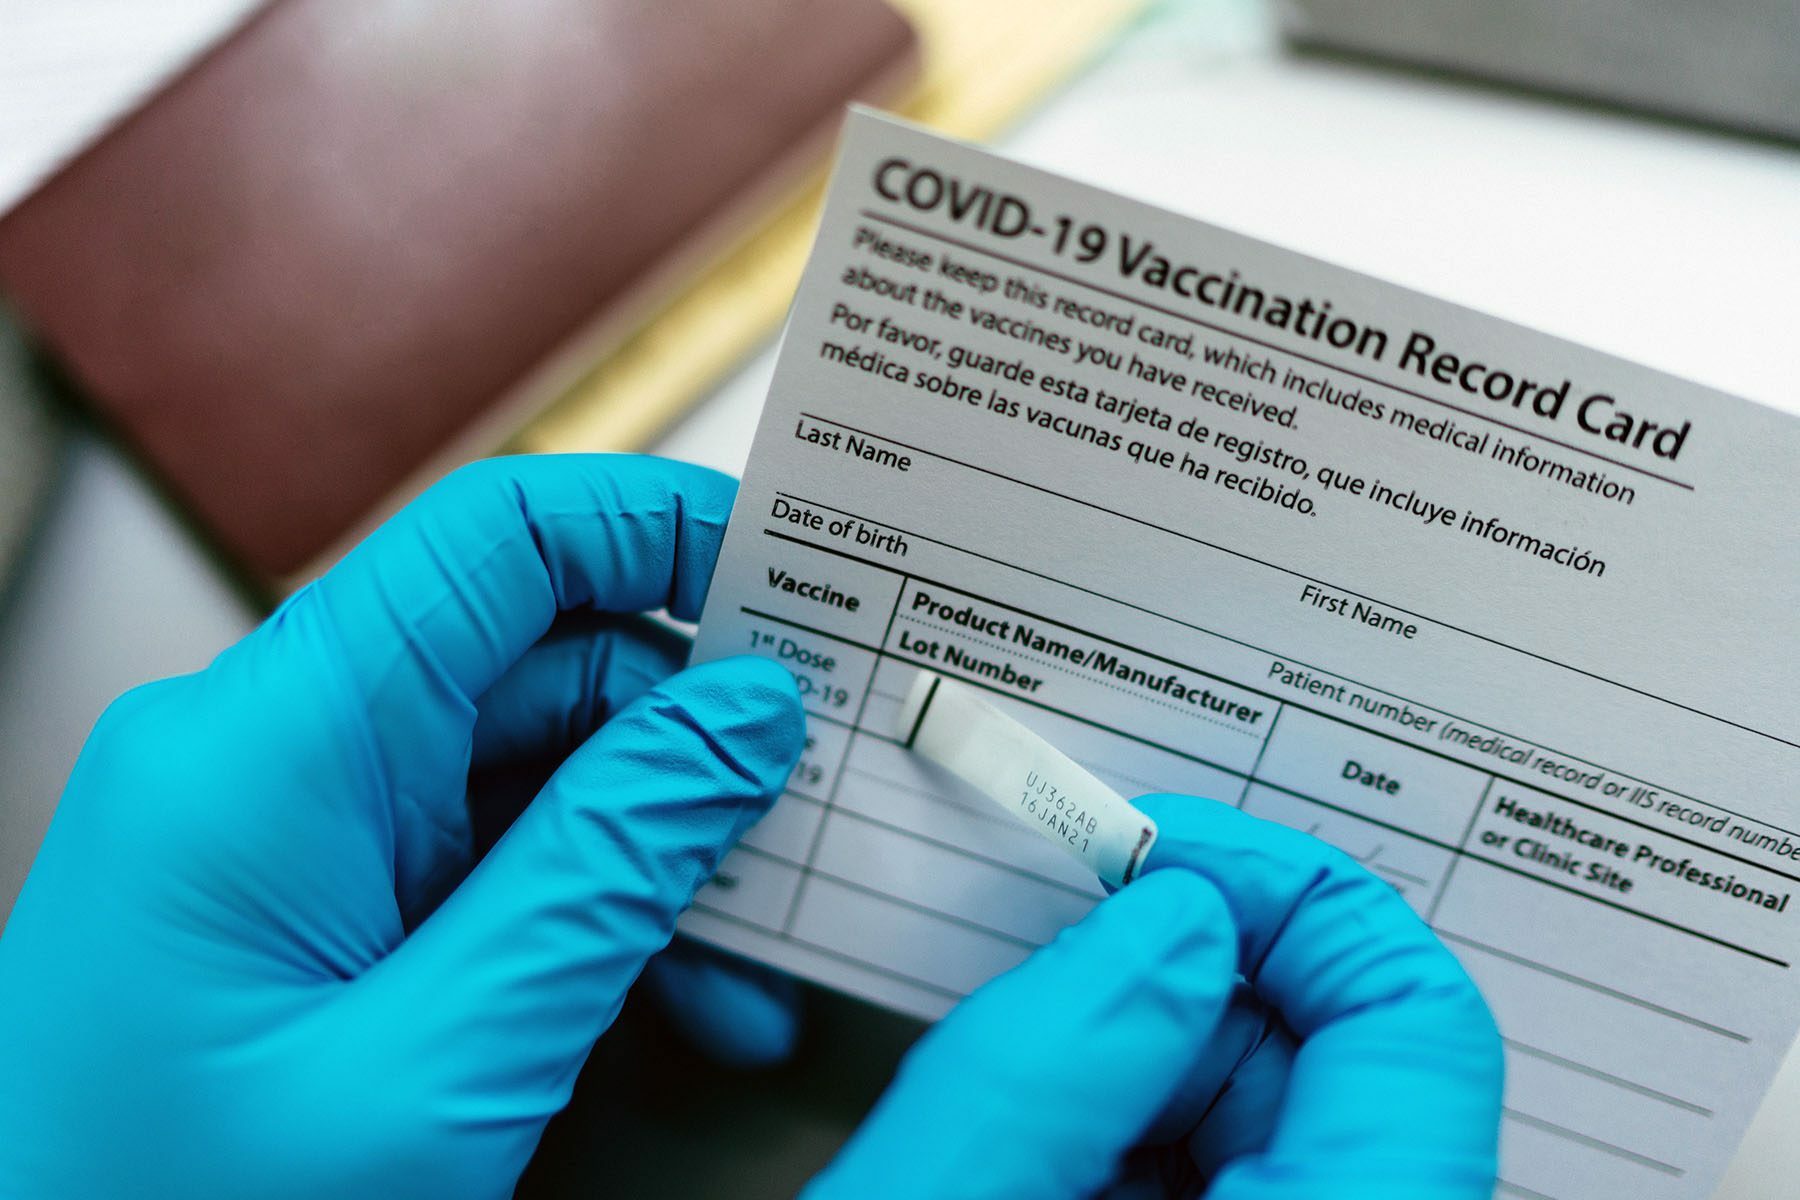 A nurse adds a label to a COVID-19 vaccination card